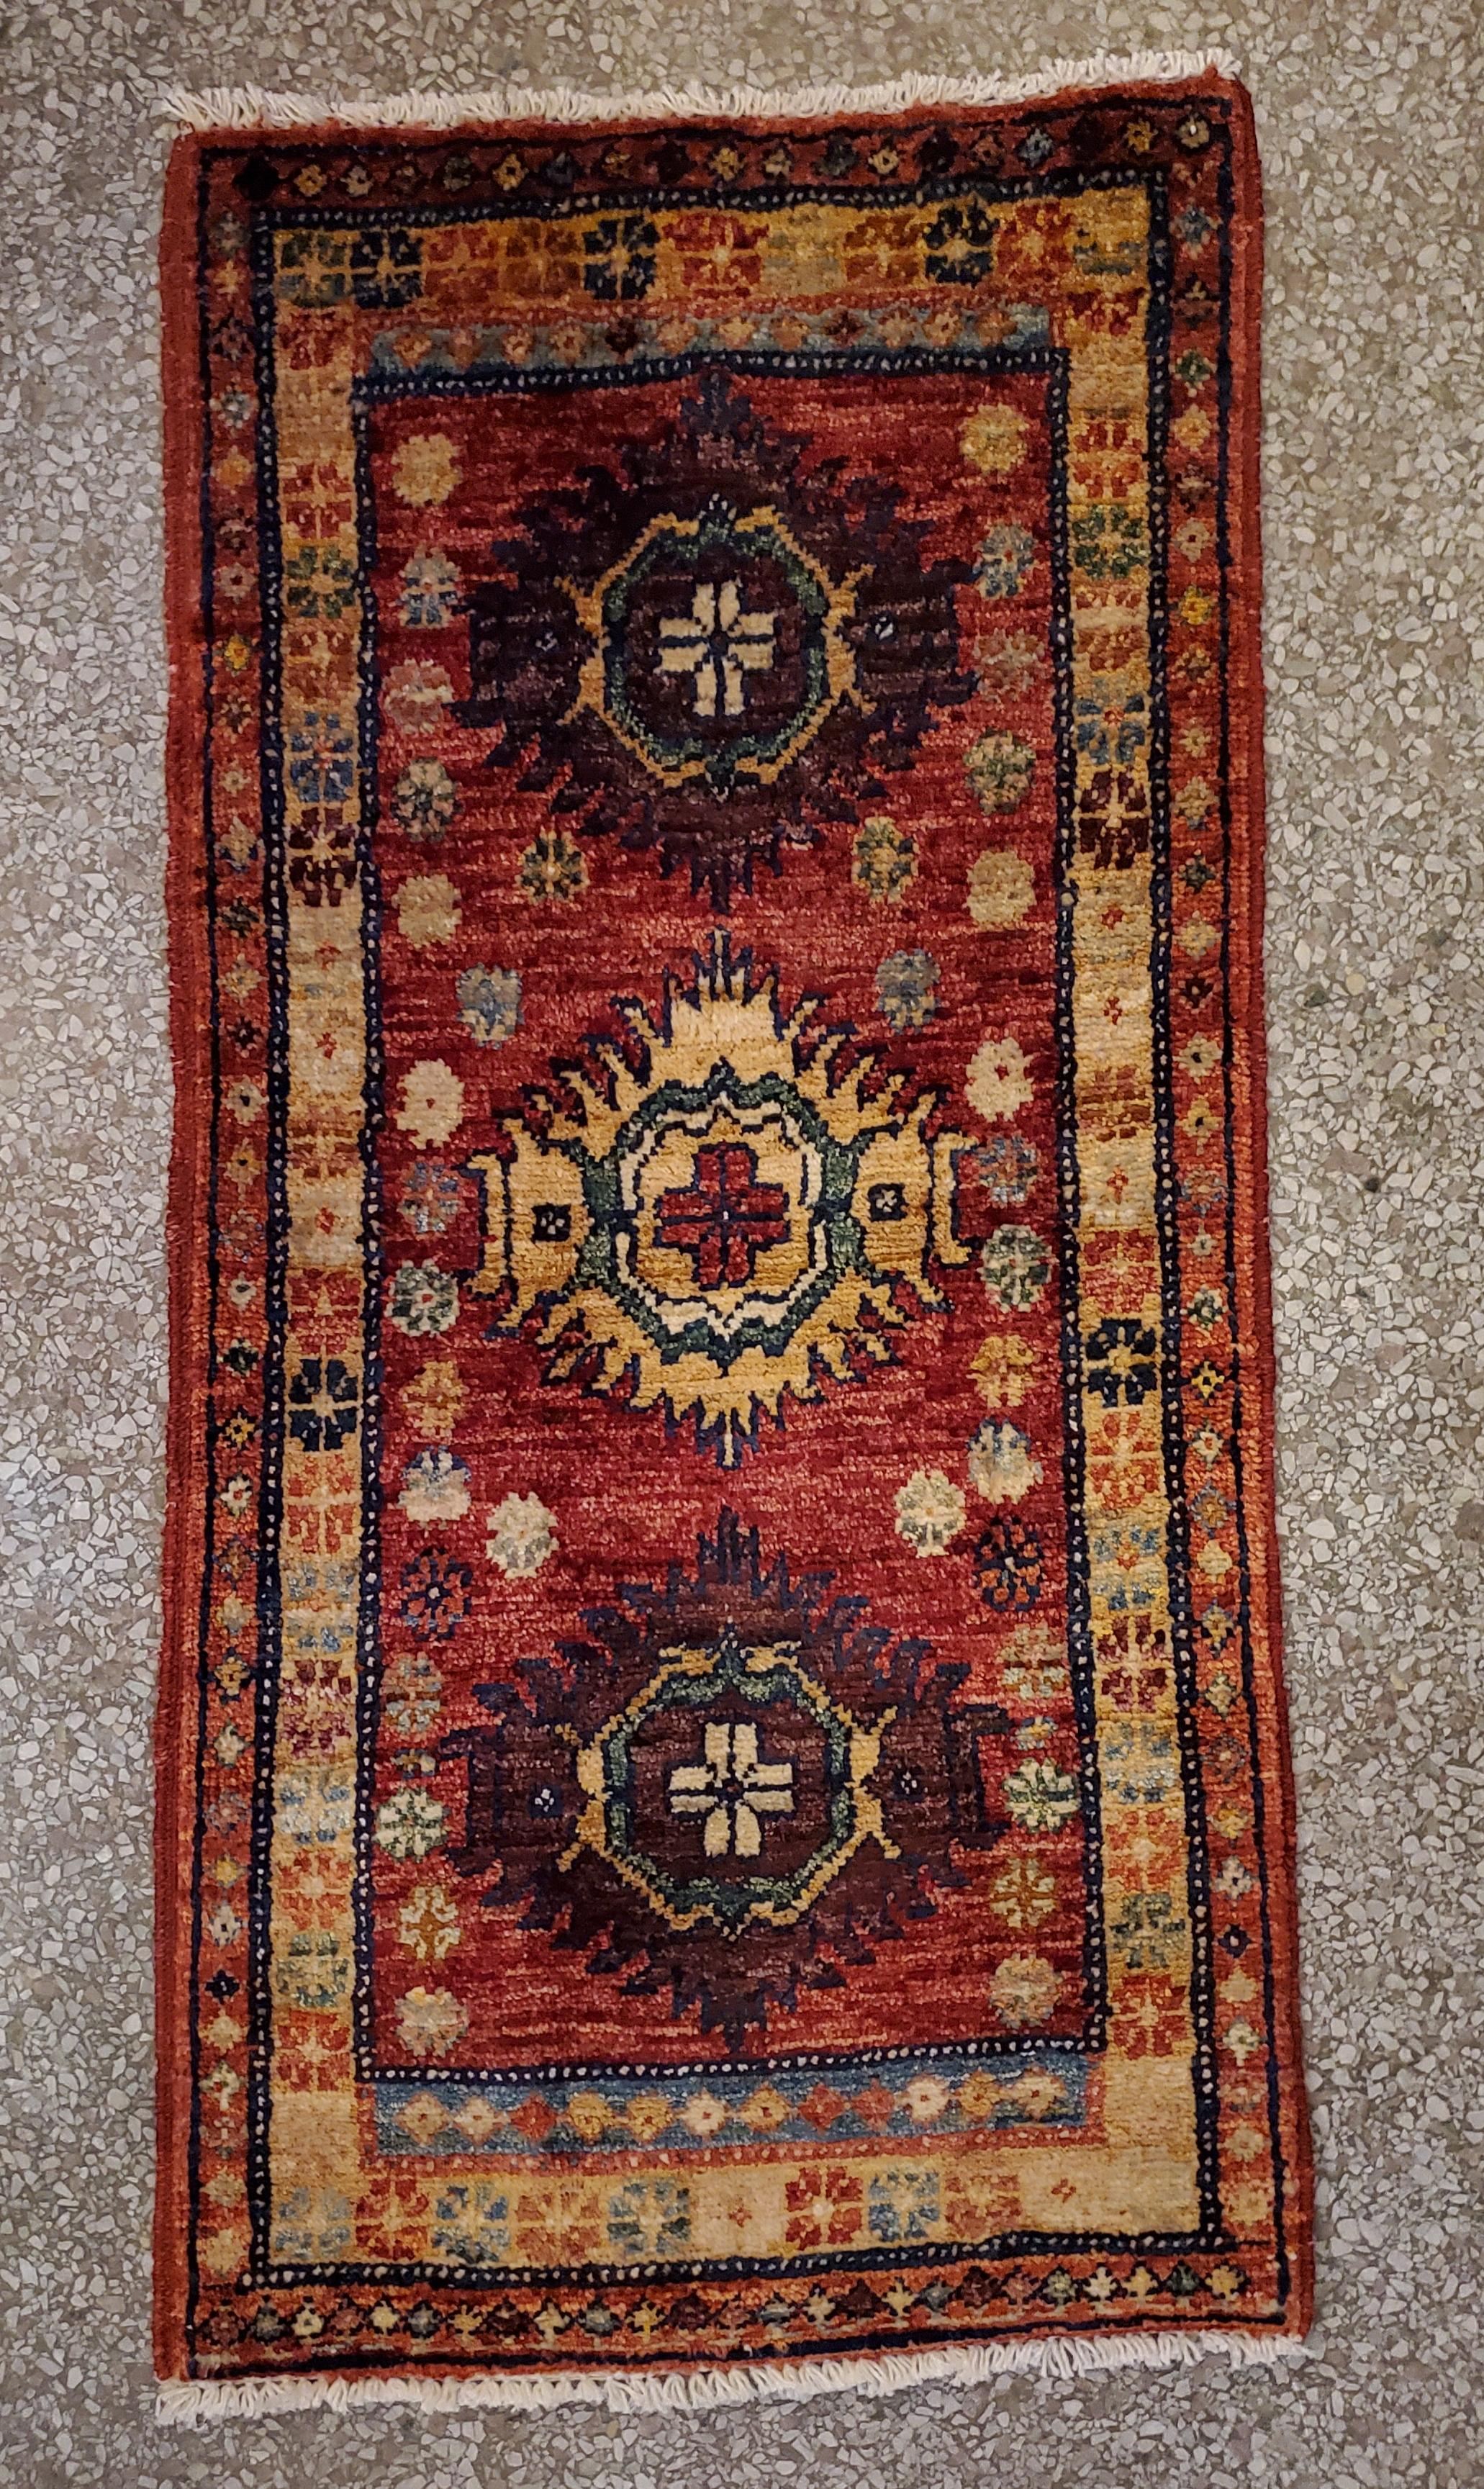 Medium Size Asian Area Rug, Colorful / 217 In New Condition For Sale In Orlando, FL